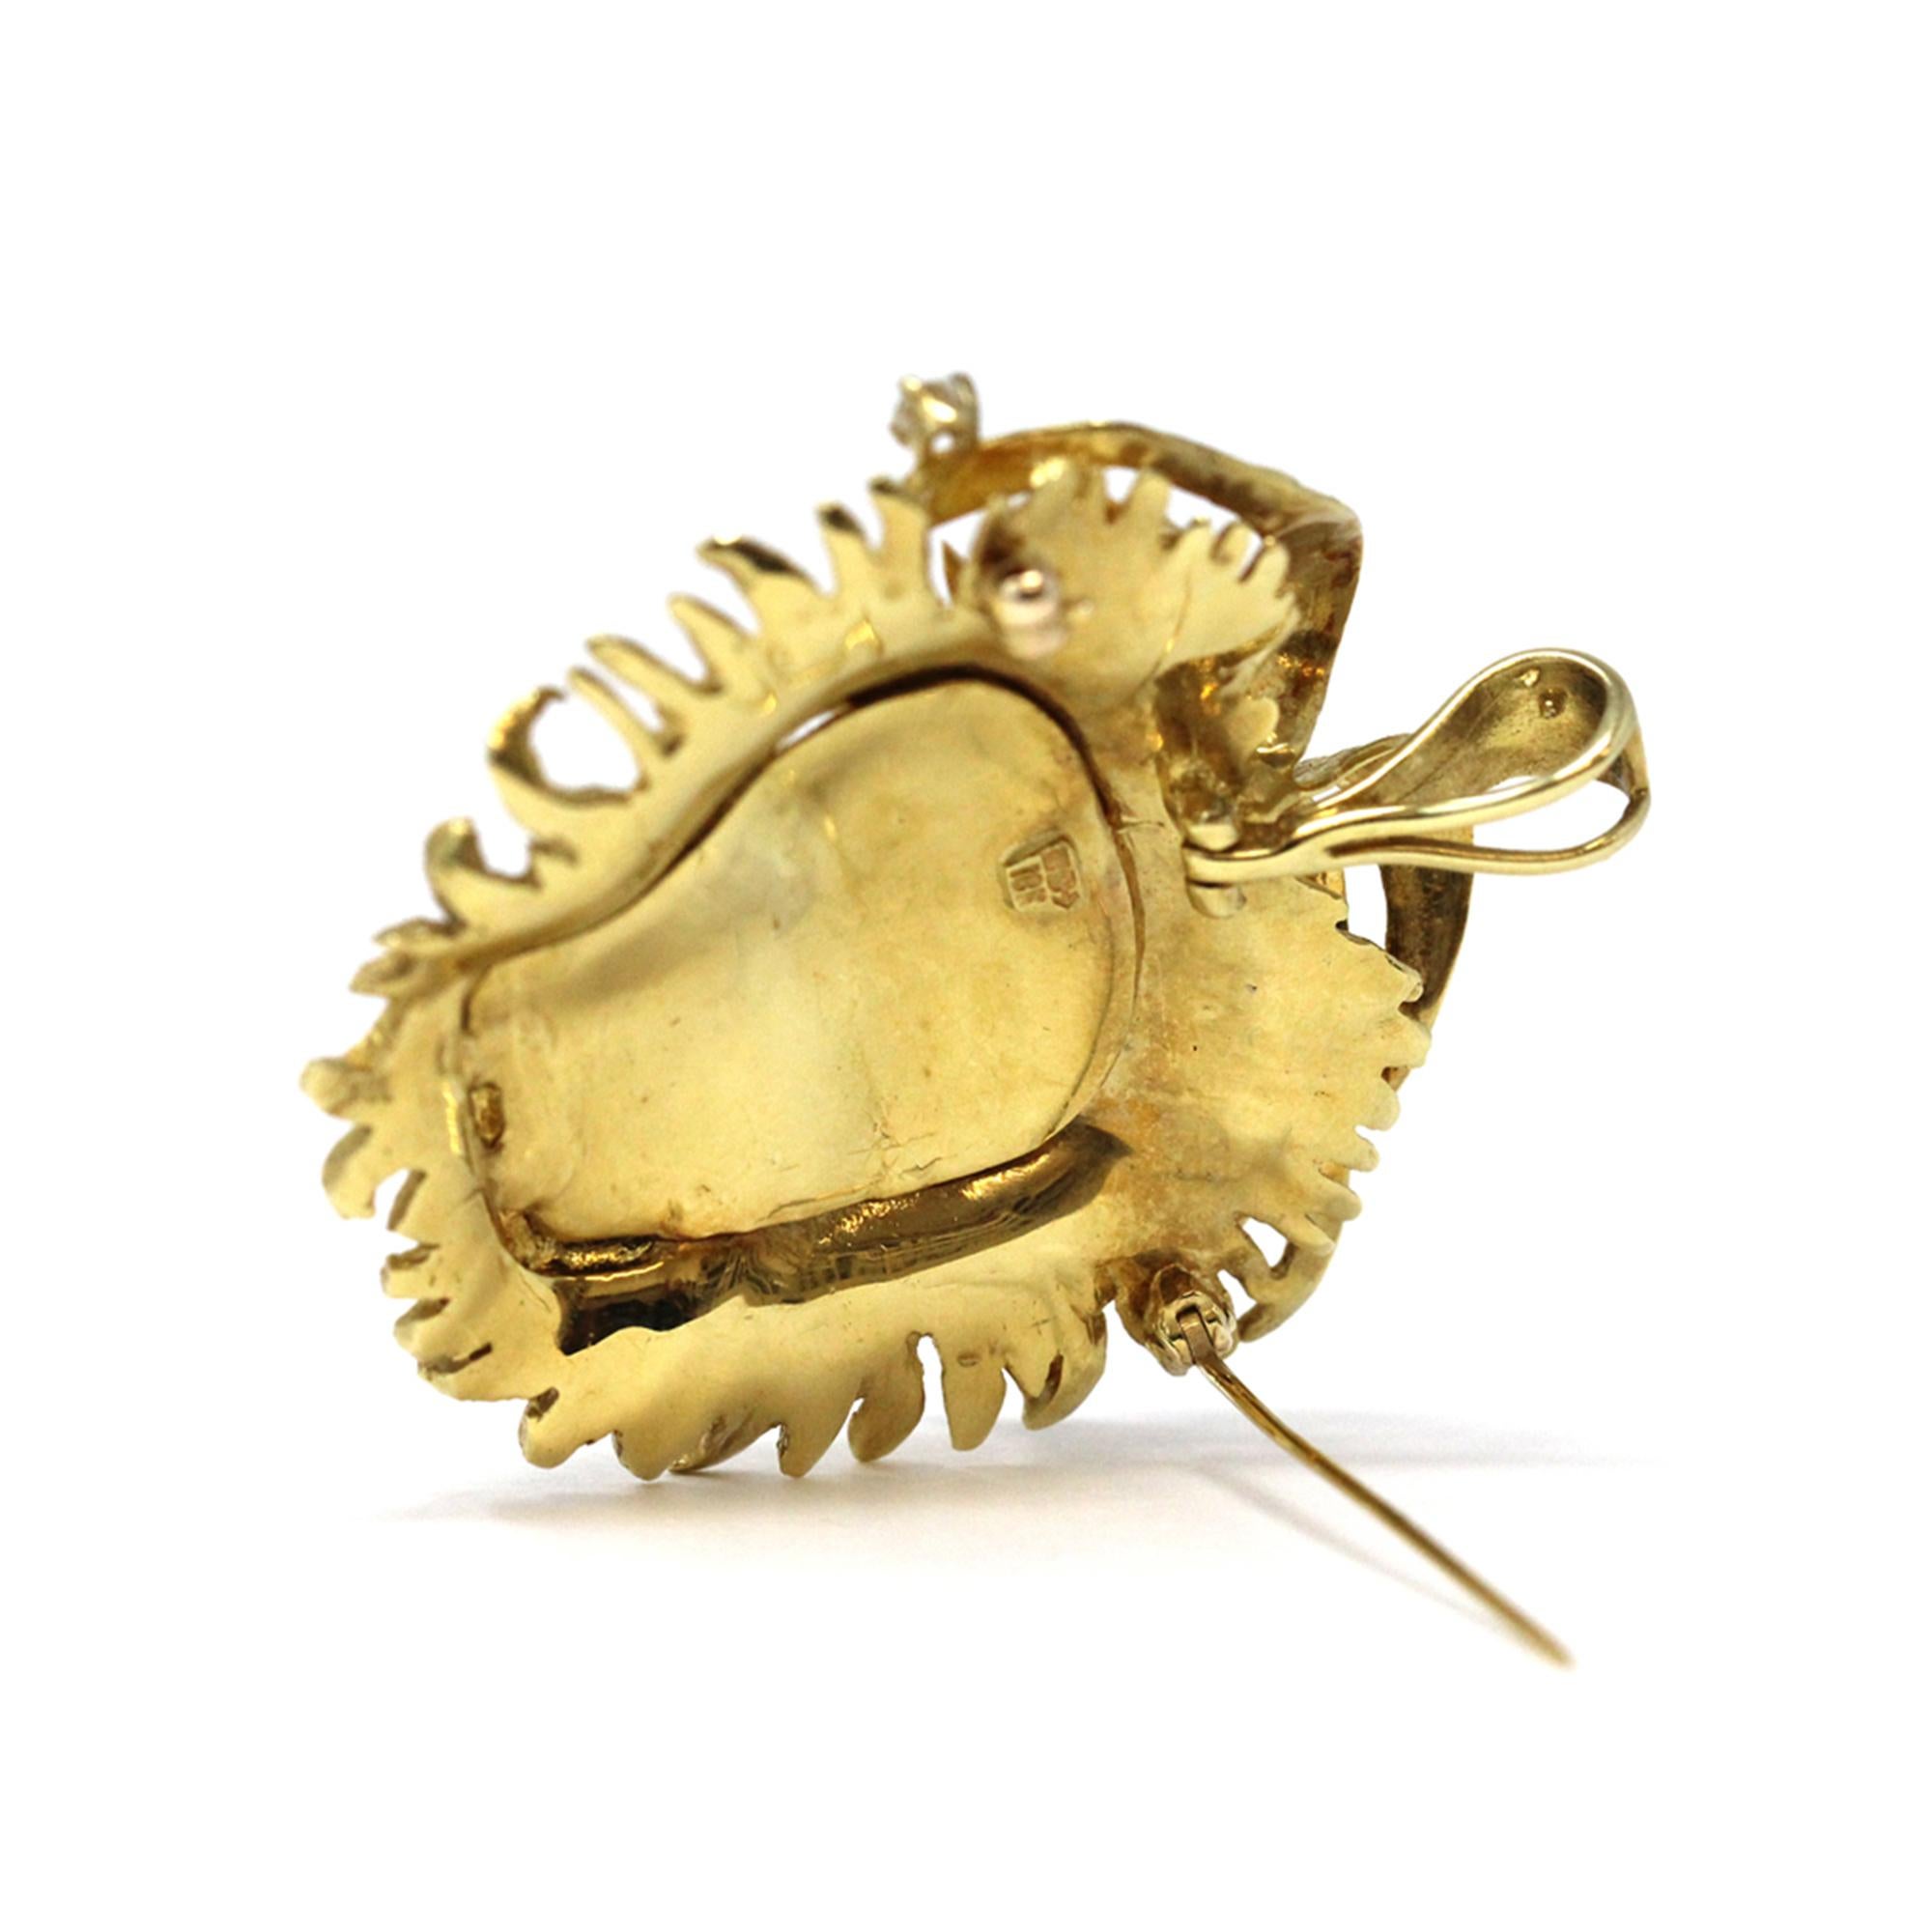 A Modern pendant/brooch lion head, circa 1960. The very well made hand executed lion head can be worn either as a pendant or as a brooch, it's made in 18k yellow and features 3 round full cut diamonds prong set. The piece measures 2 inches from bail